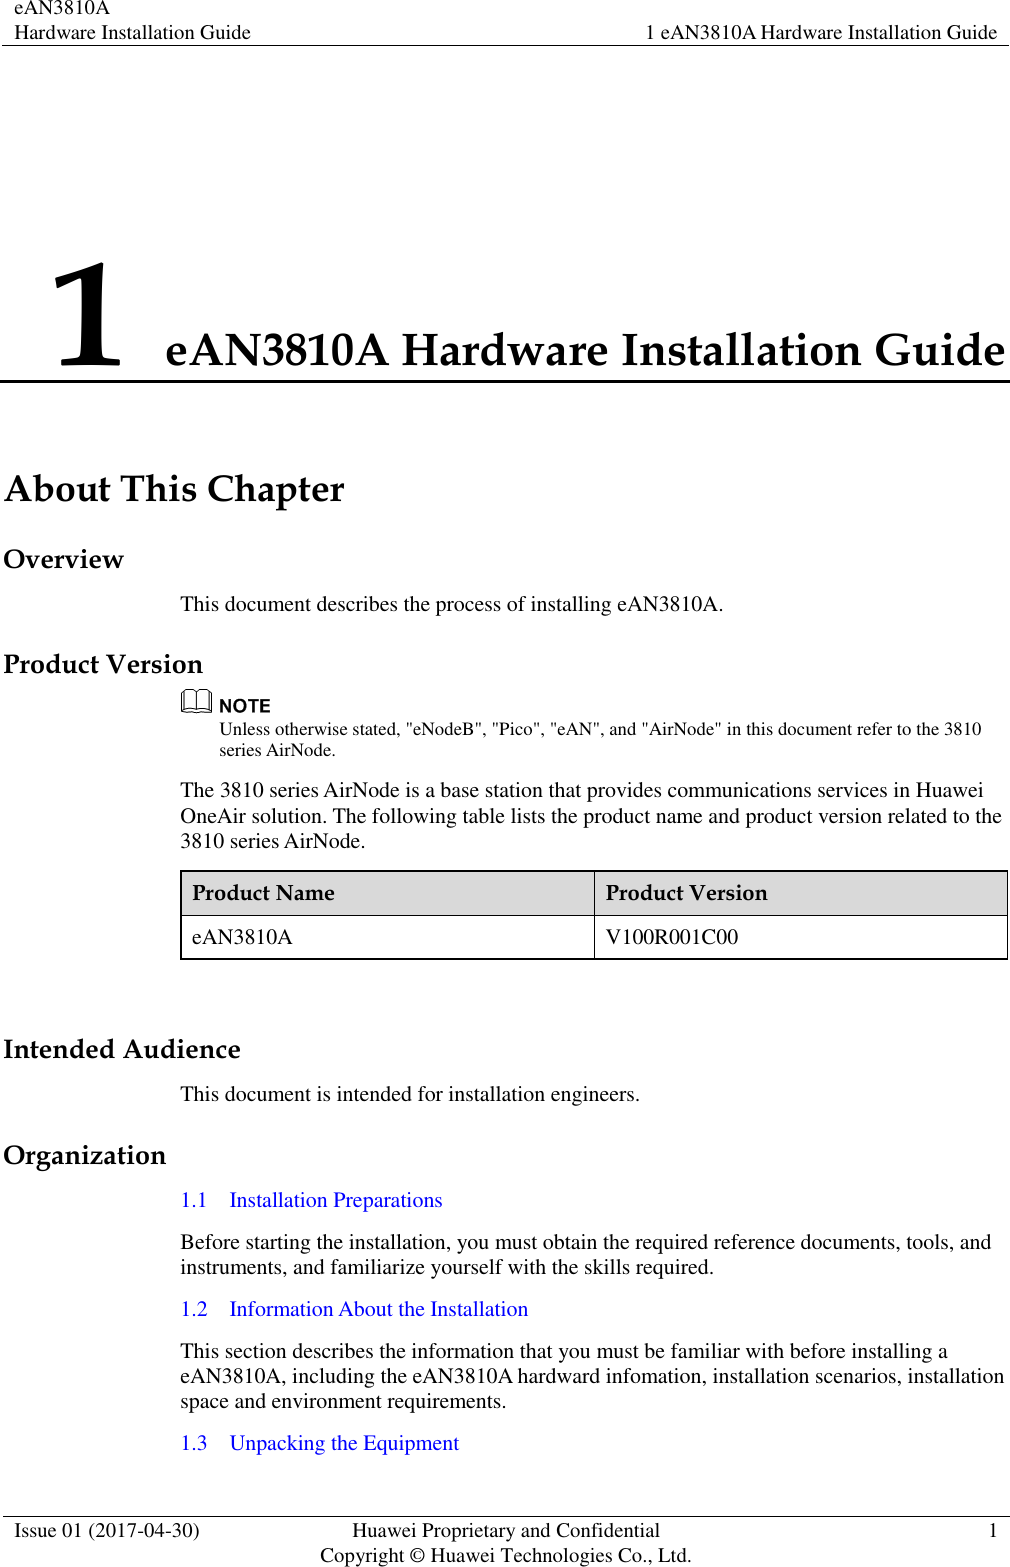 eAN3810A   Hardware Installation Guide 1 eAN3810A Hardware Installation Guide  Issue 01 (2017-04-30) Huawei Proprietary and Confidential                                     Copyright © Huawei Technologies Co., Ltd. 1  1 eAN3810A Hardware Installation Guide About This Chapter Overview This document describes the process of installing eAN3810A. Product Version  Unless otherwise stated, &quot;eNodeB&quot;, &quot;Pico&quot;, &quot;eAN&quot;, and &quot;AirNode&quot; in this document refer to the 3810 series AirNode.   The 3810 series AirNode is a base station that provides communications services in Huawei OneAir solution. The following table lists the product name and product version related to the 3810 series AirNode. Product Name Product Version eAN3810A V100R001C00  Intended Audience This document is intended for installation engineers. Organization 1.1    Installation Preparations Before starting the installation, you must obtain the required reference documents, tools, and instruments, and familiarize yourself with the skills required. 1.2    Information About the Installation This section describes the information that you must be familiar with before installing a eAN3810A, including the eAN3810A hardward infomation, installation scenarios, installation space and environment requirements. 1.3    Unpacking the Equipment 